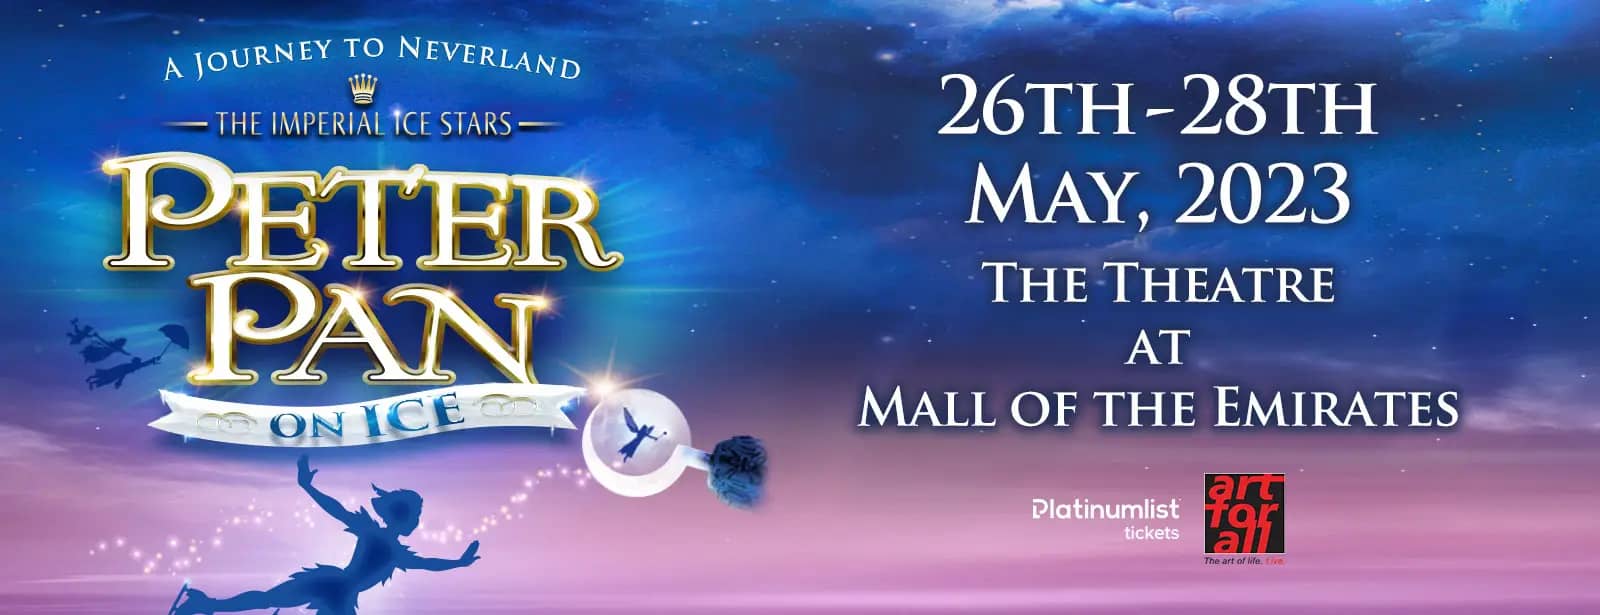 Peter Pan On Ice at The Theatre - Mall of the Emirates, Dubai